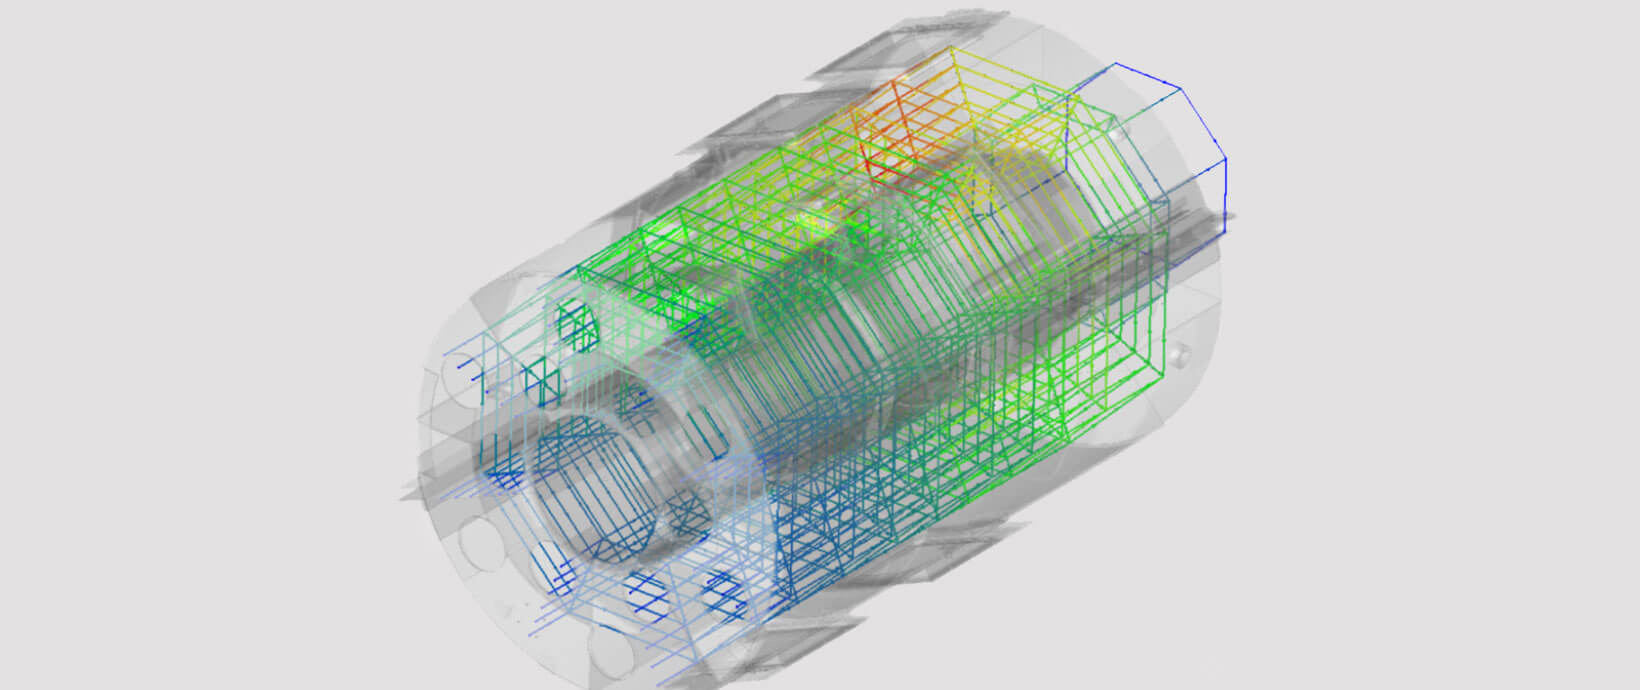 Altair Acquires Flow Simulator; an Integrated Flow, Heat Transfer, and Combustion Design Software, from GE Aviation, to Expand into New Industries